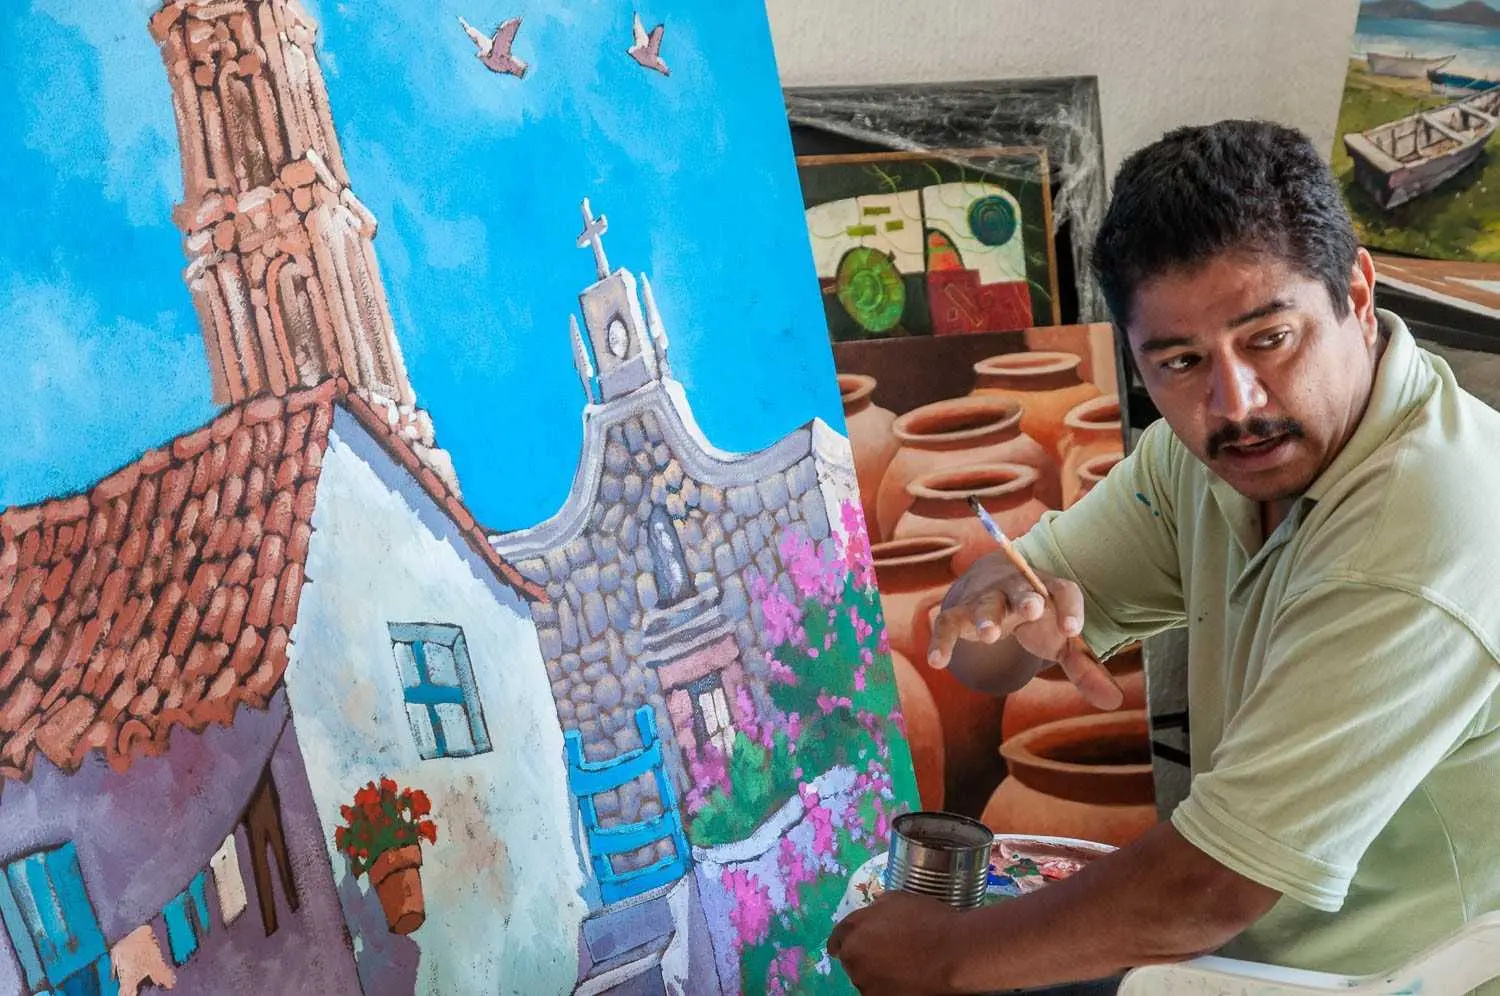 Efrén Gonzalez at work on one of his paintings in 2010.